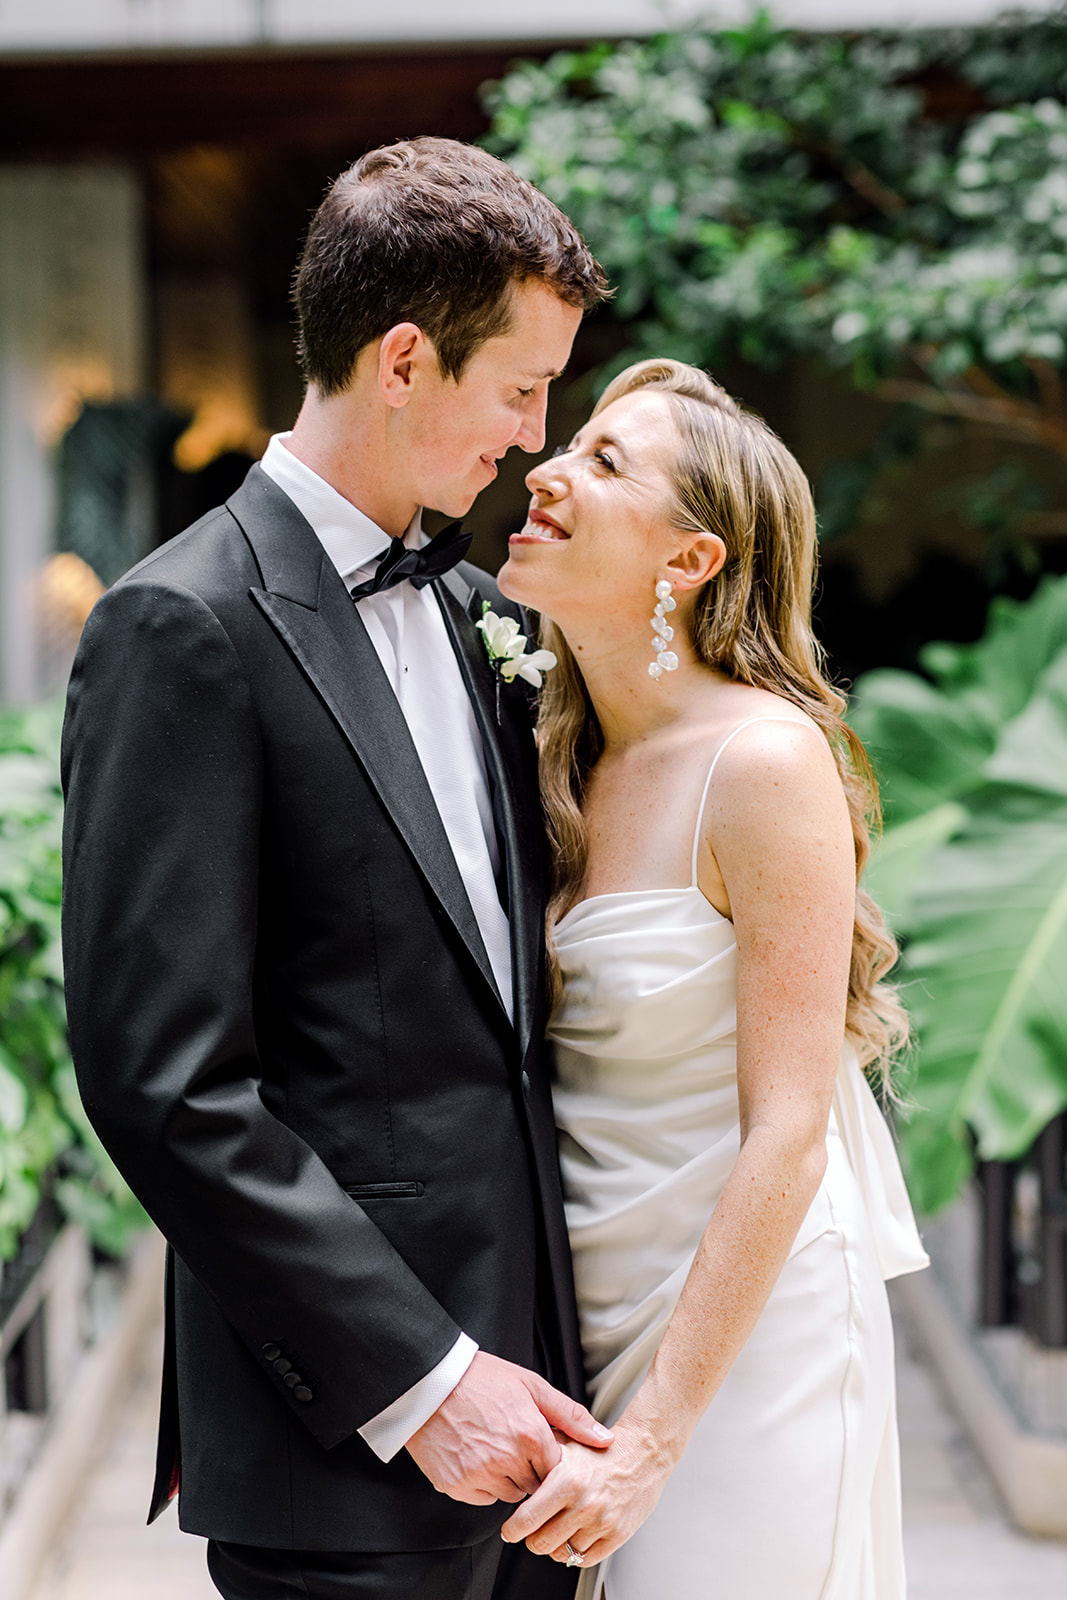 Bride and groom smile at each other for a candid portrait after first look at Mayfair House Hotel and Garden in Coconut Grove neighborhood of Miami, Florida. Elegant and modern wedding day photography by Tara Raftovich of Wedding by Tara.